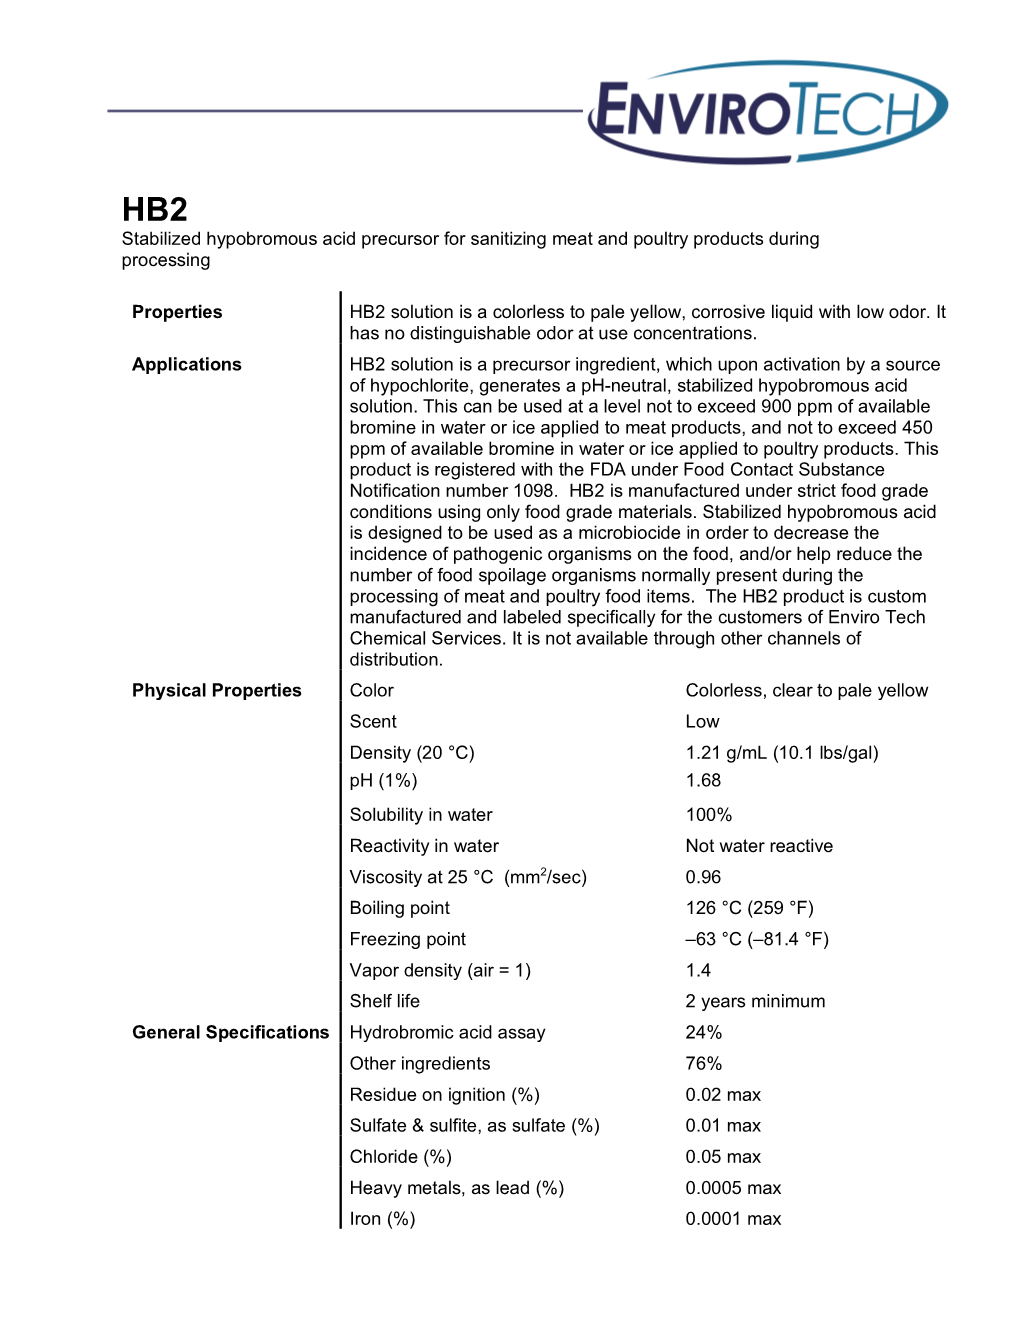 HB2 Stabilized Hypobromous Acid Precursor for Sanitizing Meat and Poultry Products During Processing